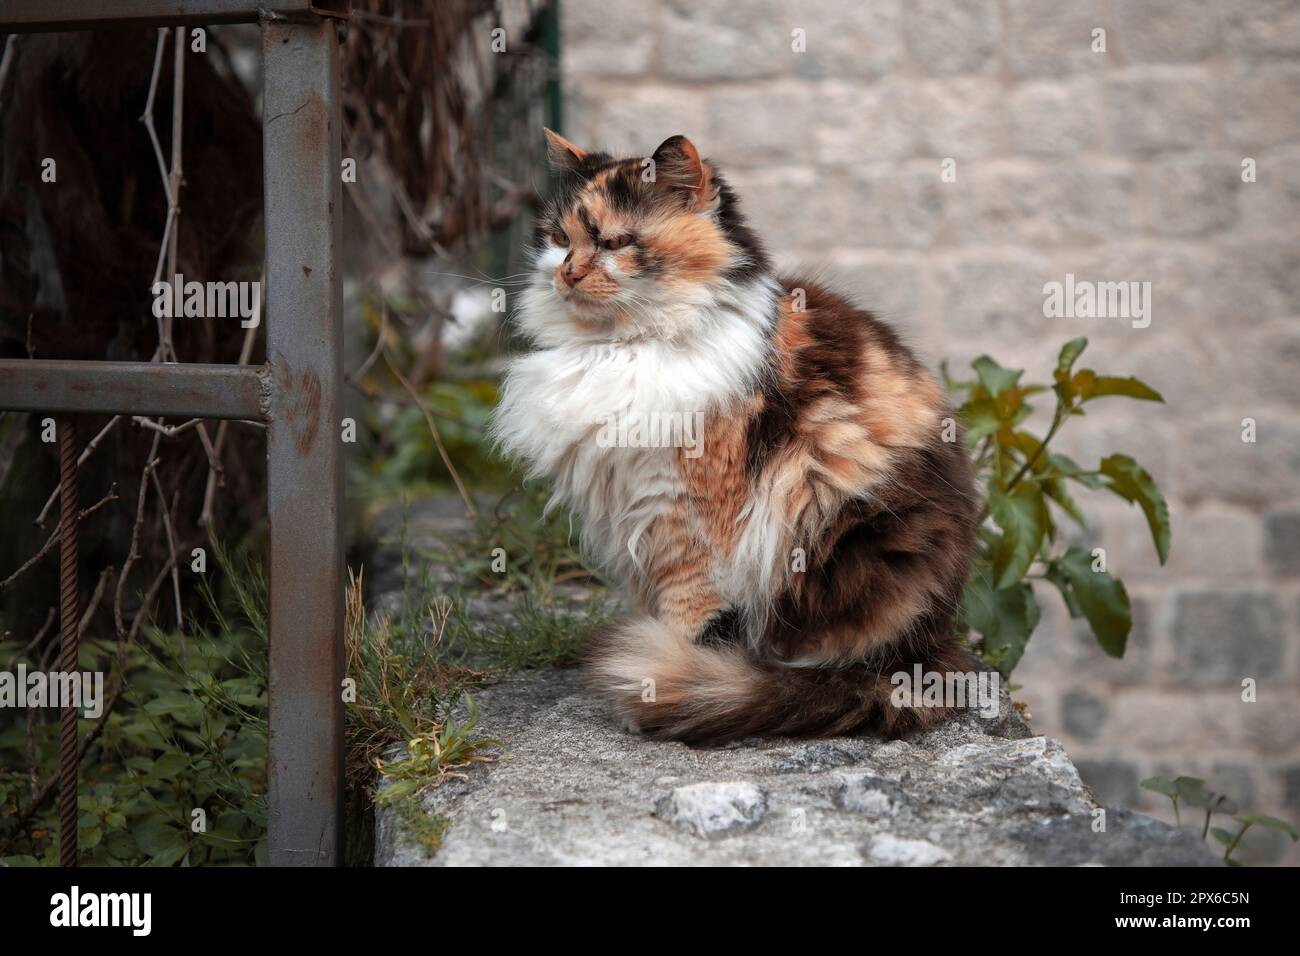 Portrait of a tricolor cat sitting on a stone fence Stock Photo